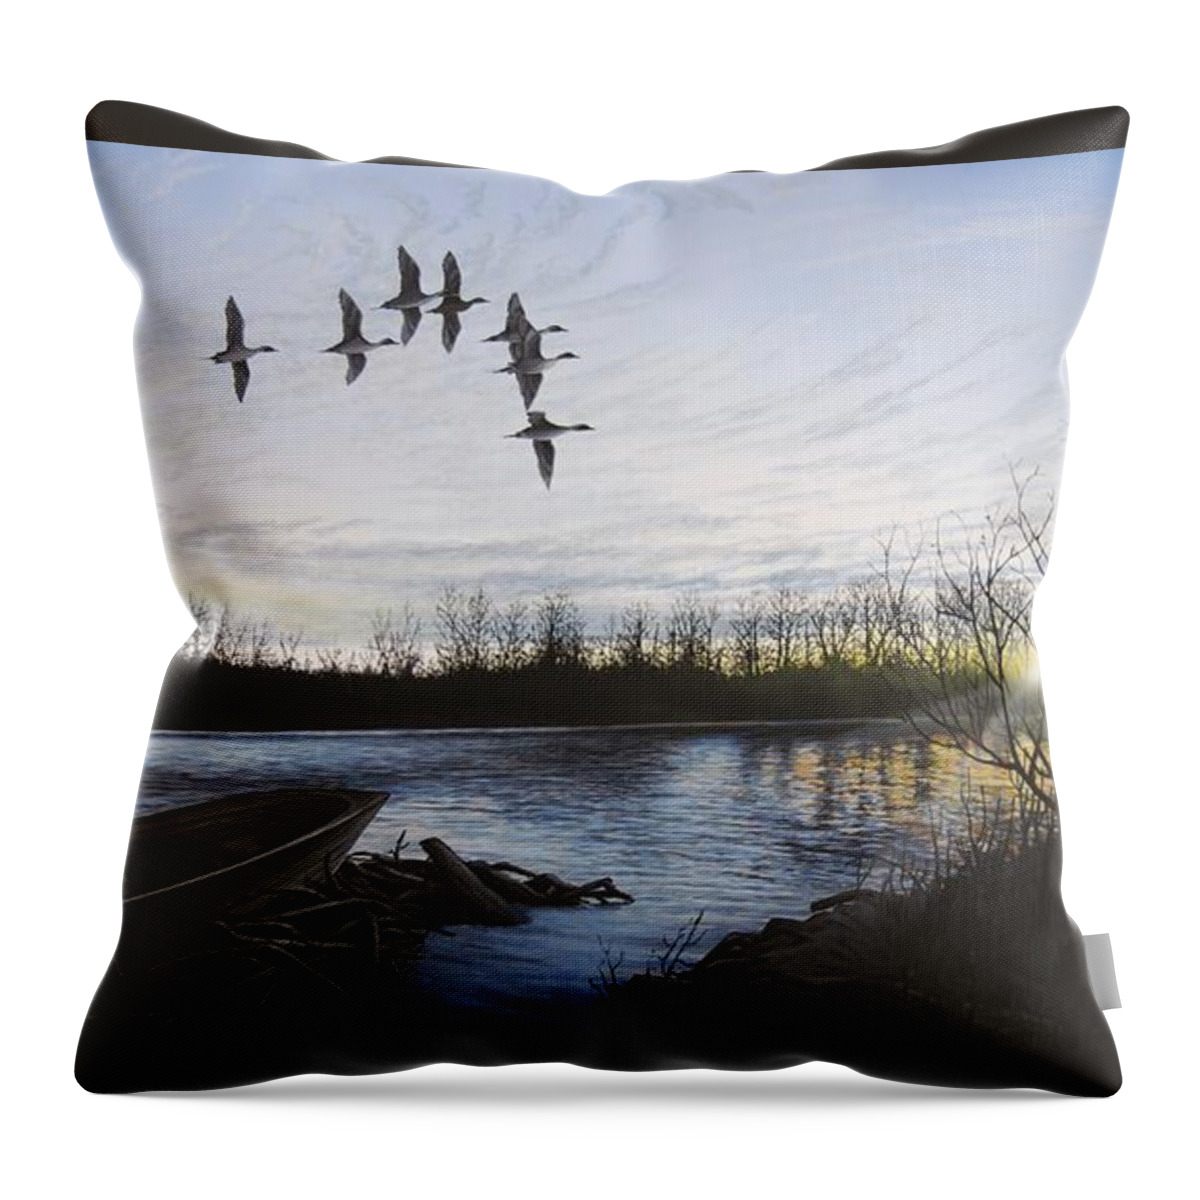 Pintails Throw Pillow featuring the painting Morning Retreat - Pintails by Anthony J Padgett